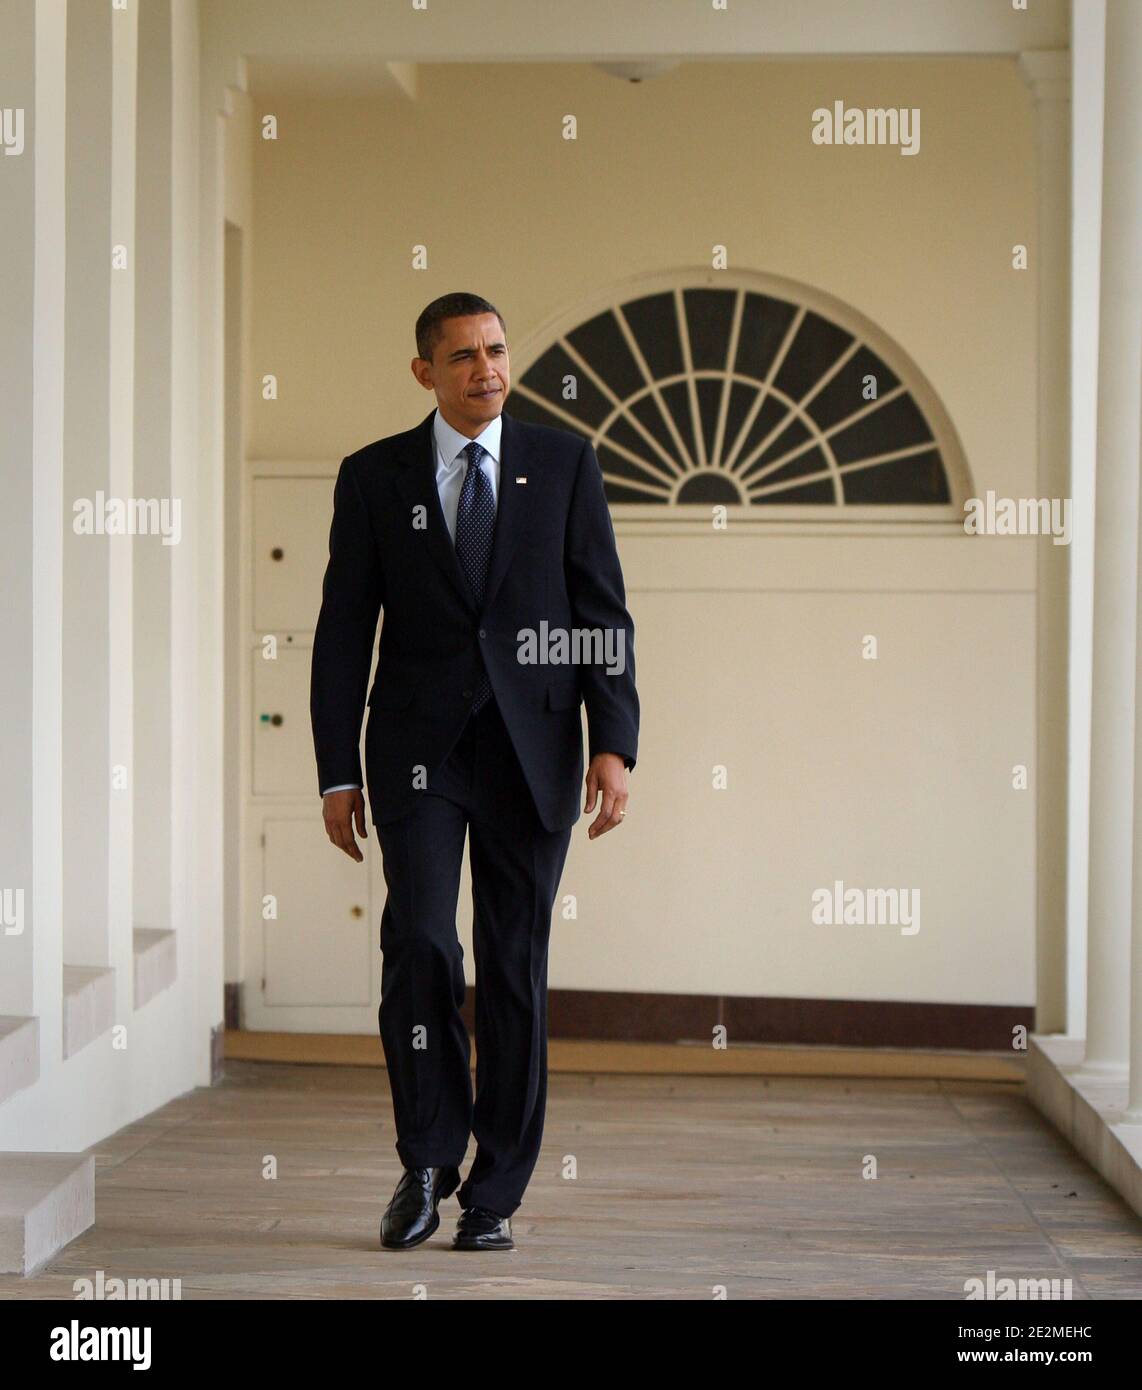 US President Barack Obama walks along the colonnade of The White House to the Oval Office in Washington, DC, USA on January 27, 2010. Later this evening, while facing declining popularity among the American people, Obama will give his first State of The Union address in which he is expected to call for, among other things, tax cuts for the middle class and a three year freeze on discretionary spending. Photo by Chris Kleponis/ABACAPRESS.COM (Pictured: Barack Obama) Stock Photo